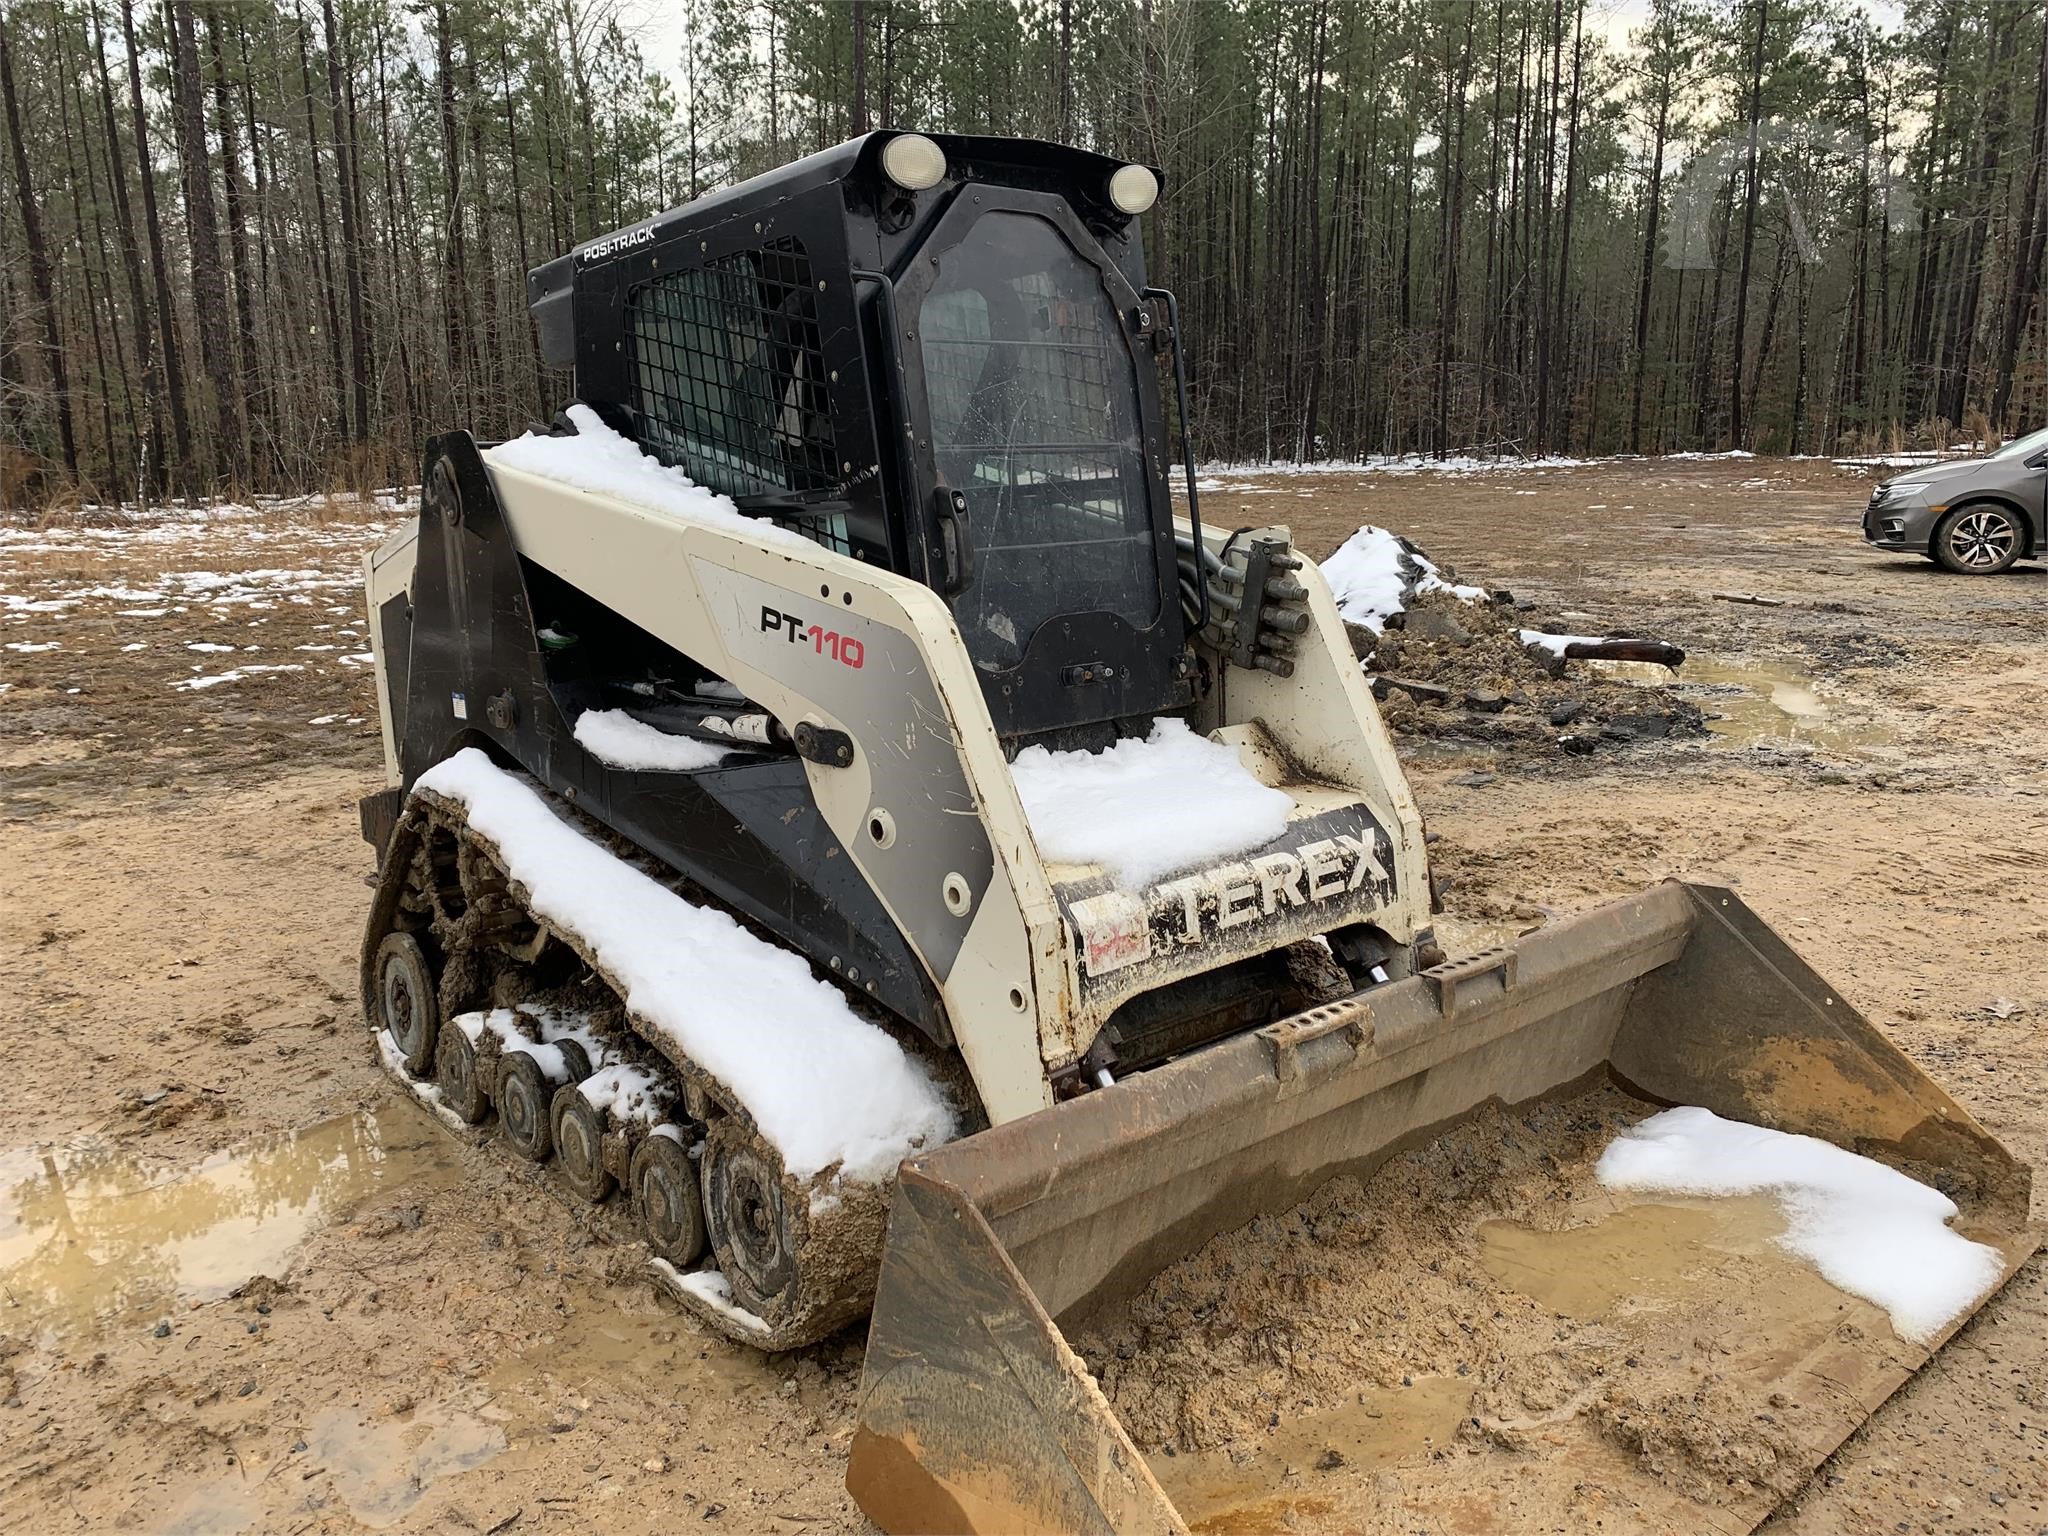 Skid Steers Online Auctions - 5 Lots | AuctionTime.com